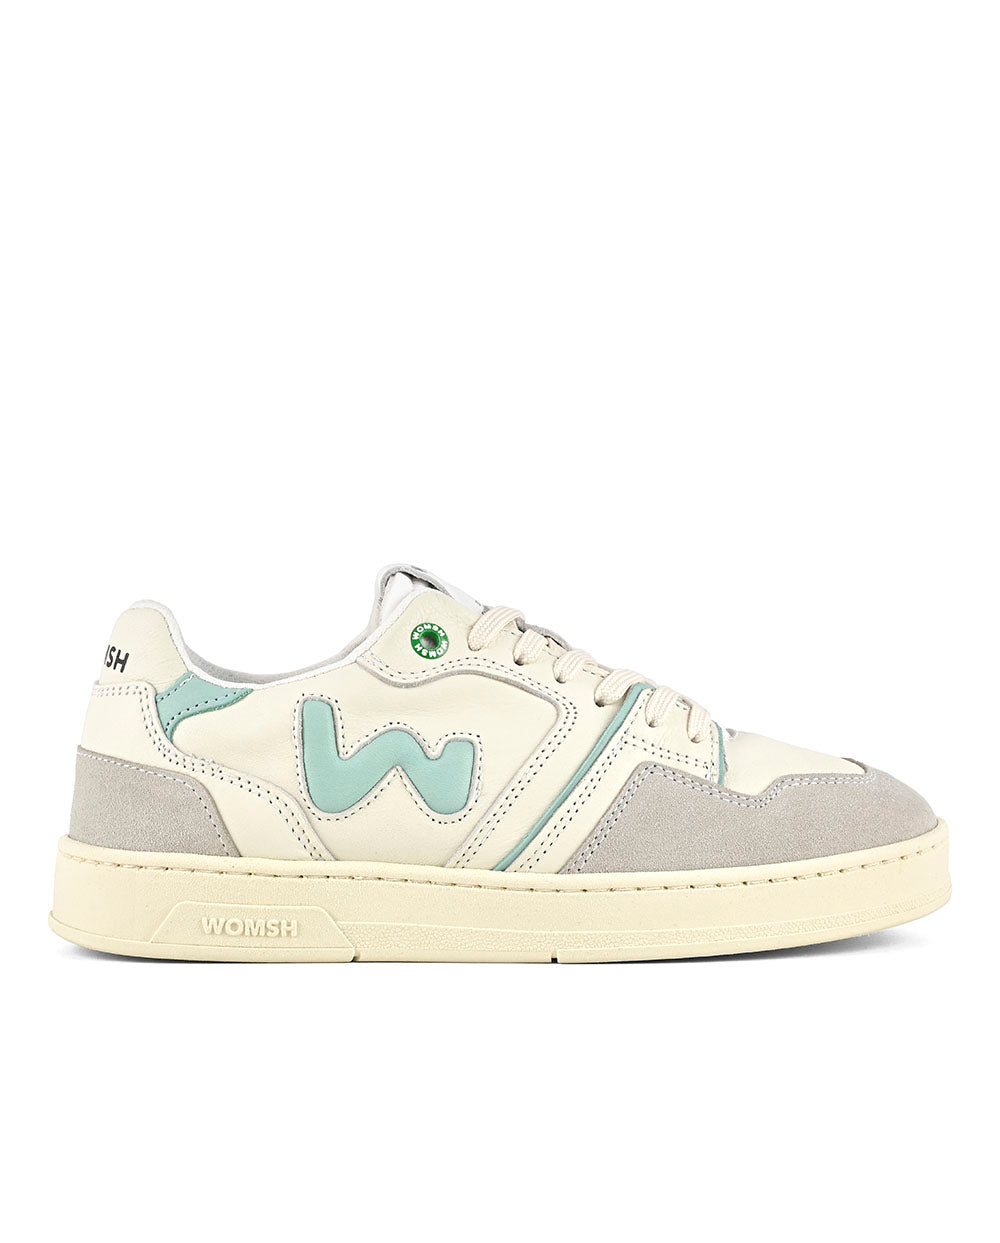 Womsh Sneakers C1010 off water